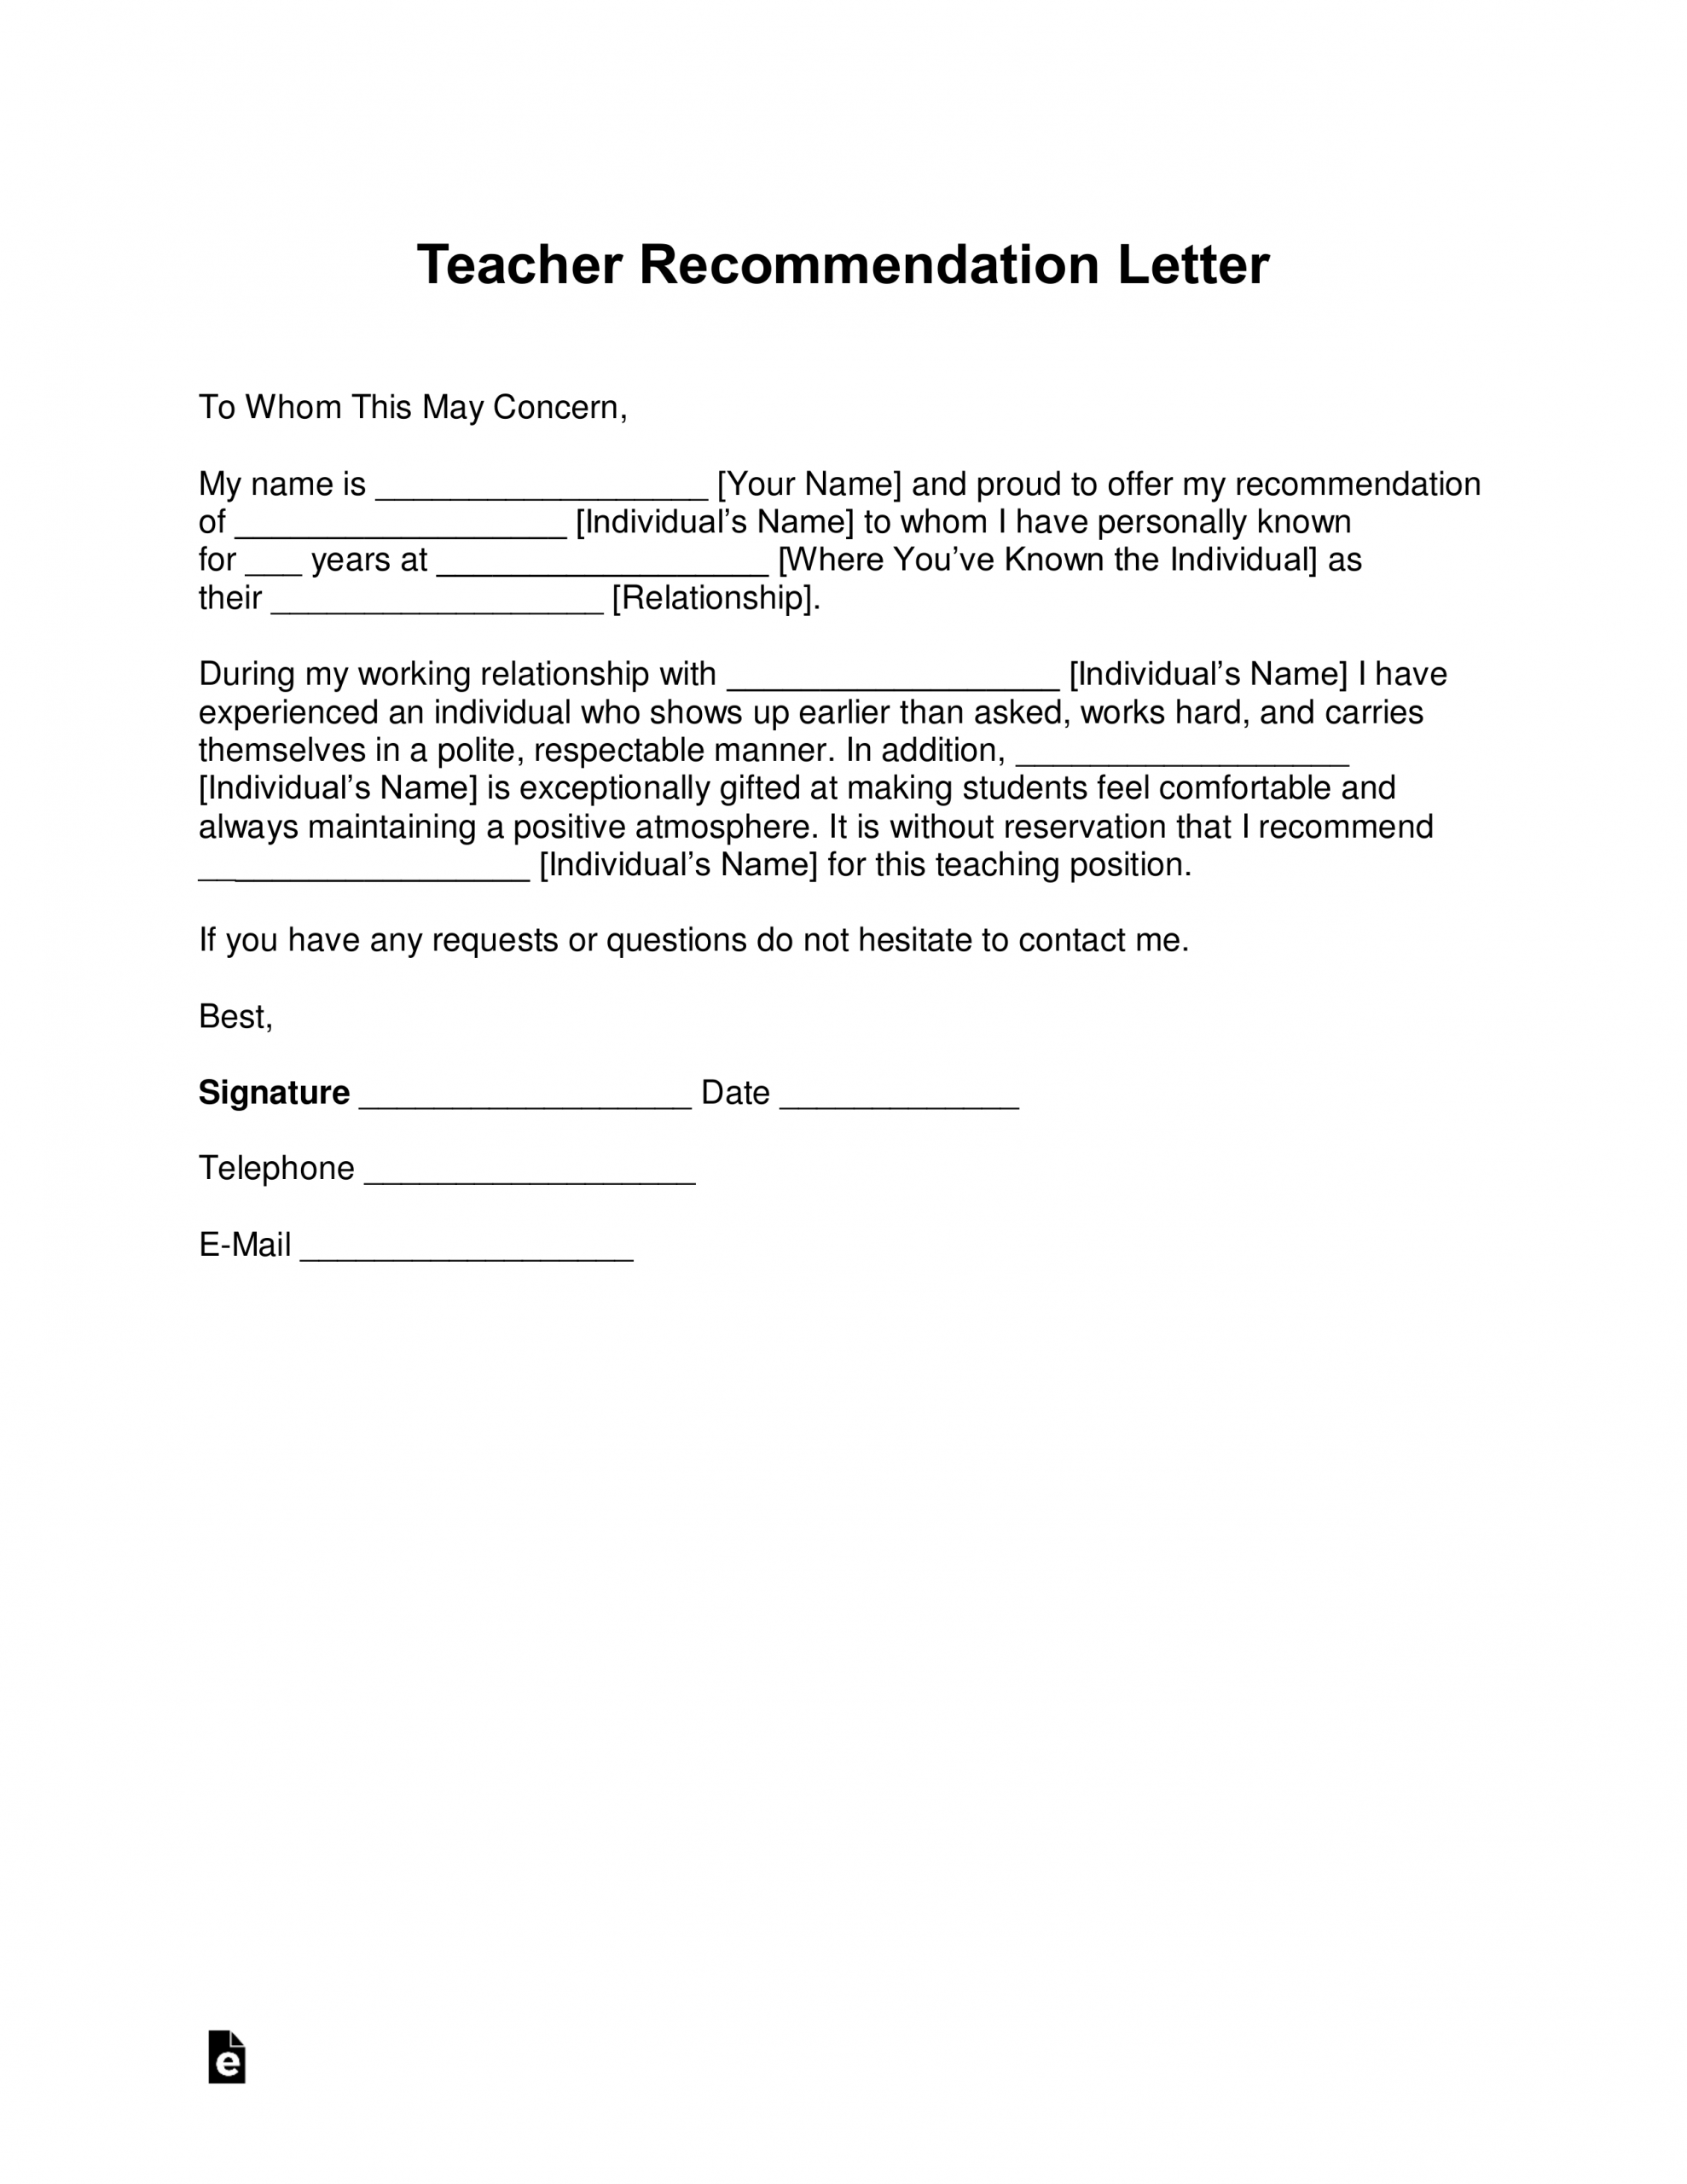 Free Teacher Recommendation Letter Template With Samples in size 2550 X 3301